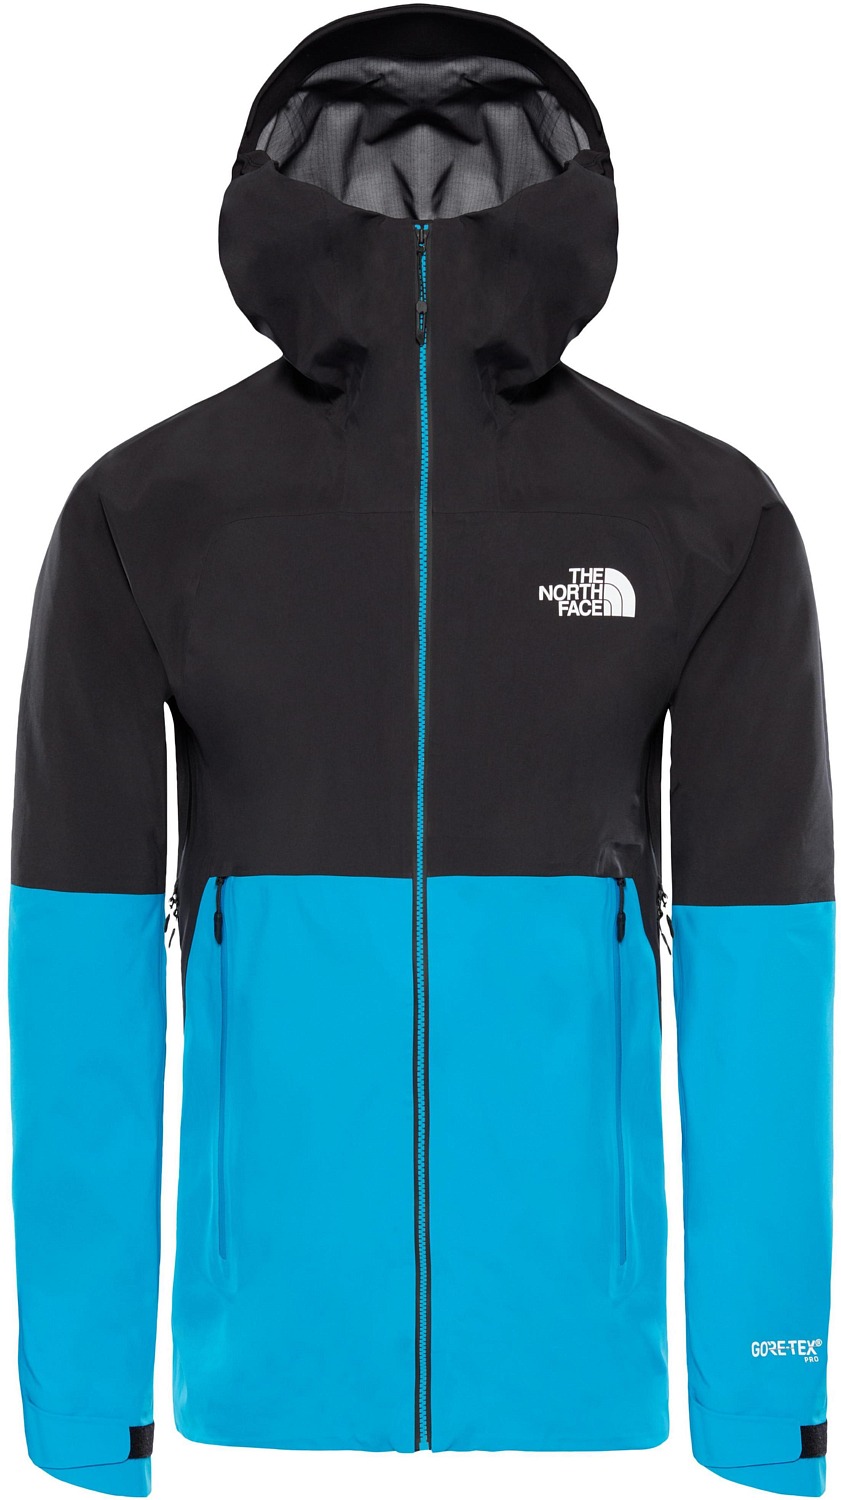 Куртка The North Face 2018-19 IMPENDOR SHELL JKT HYPER BLUE/TNF